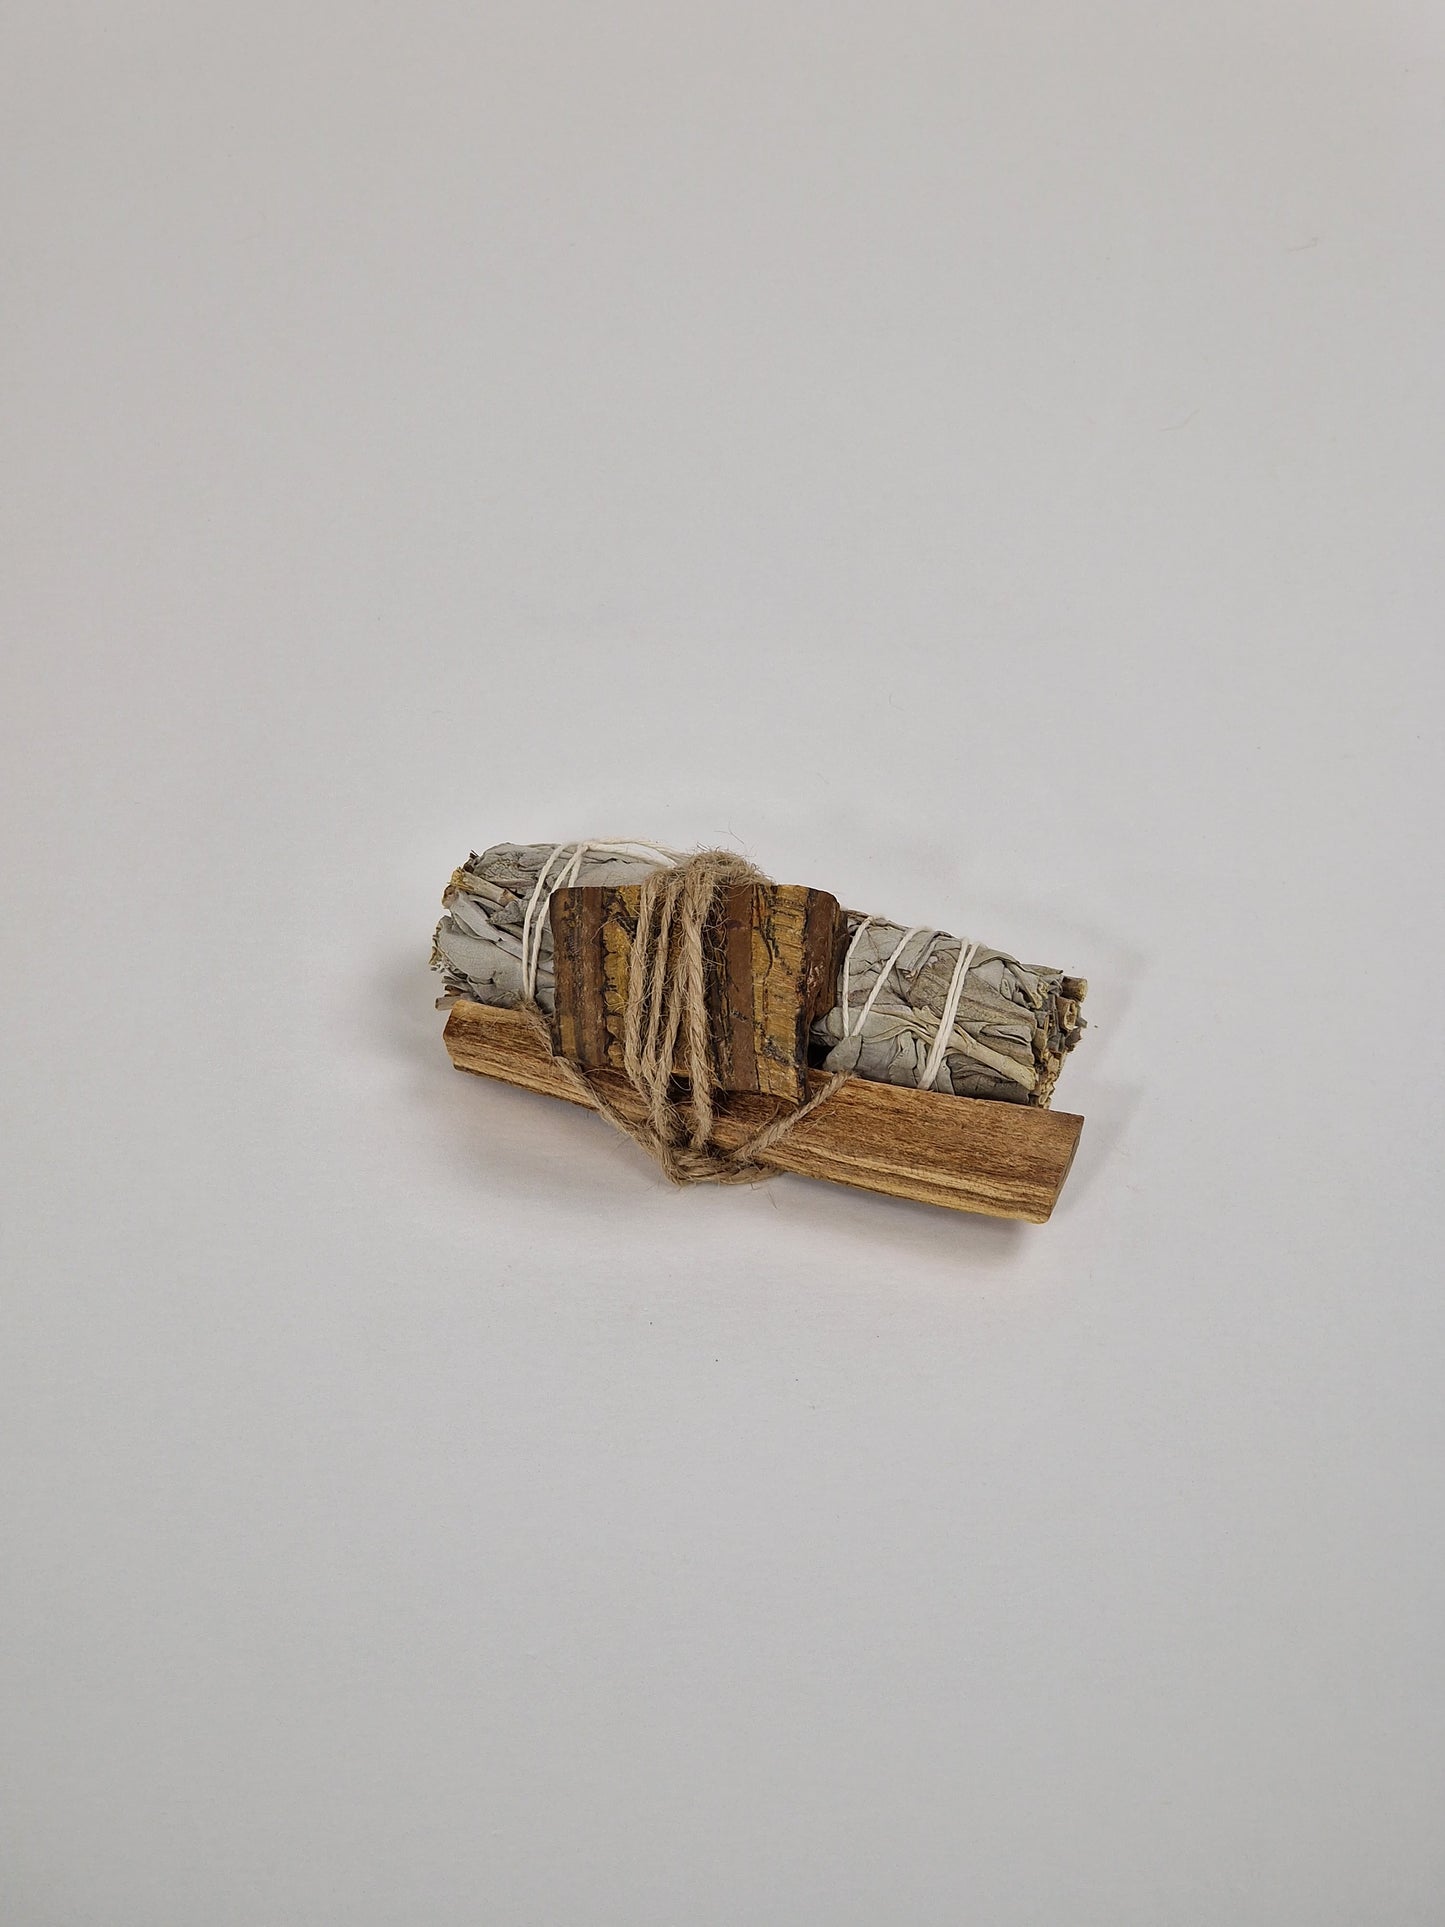 Tiger's Eye crystal with sage and smudge stick